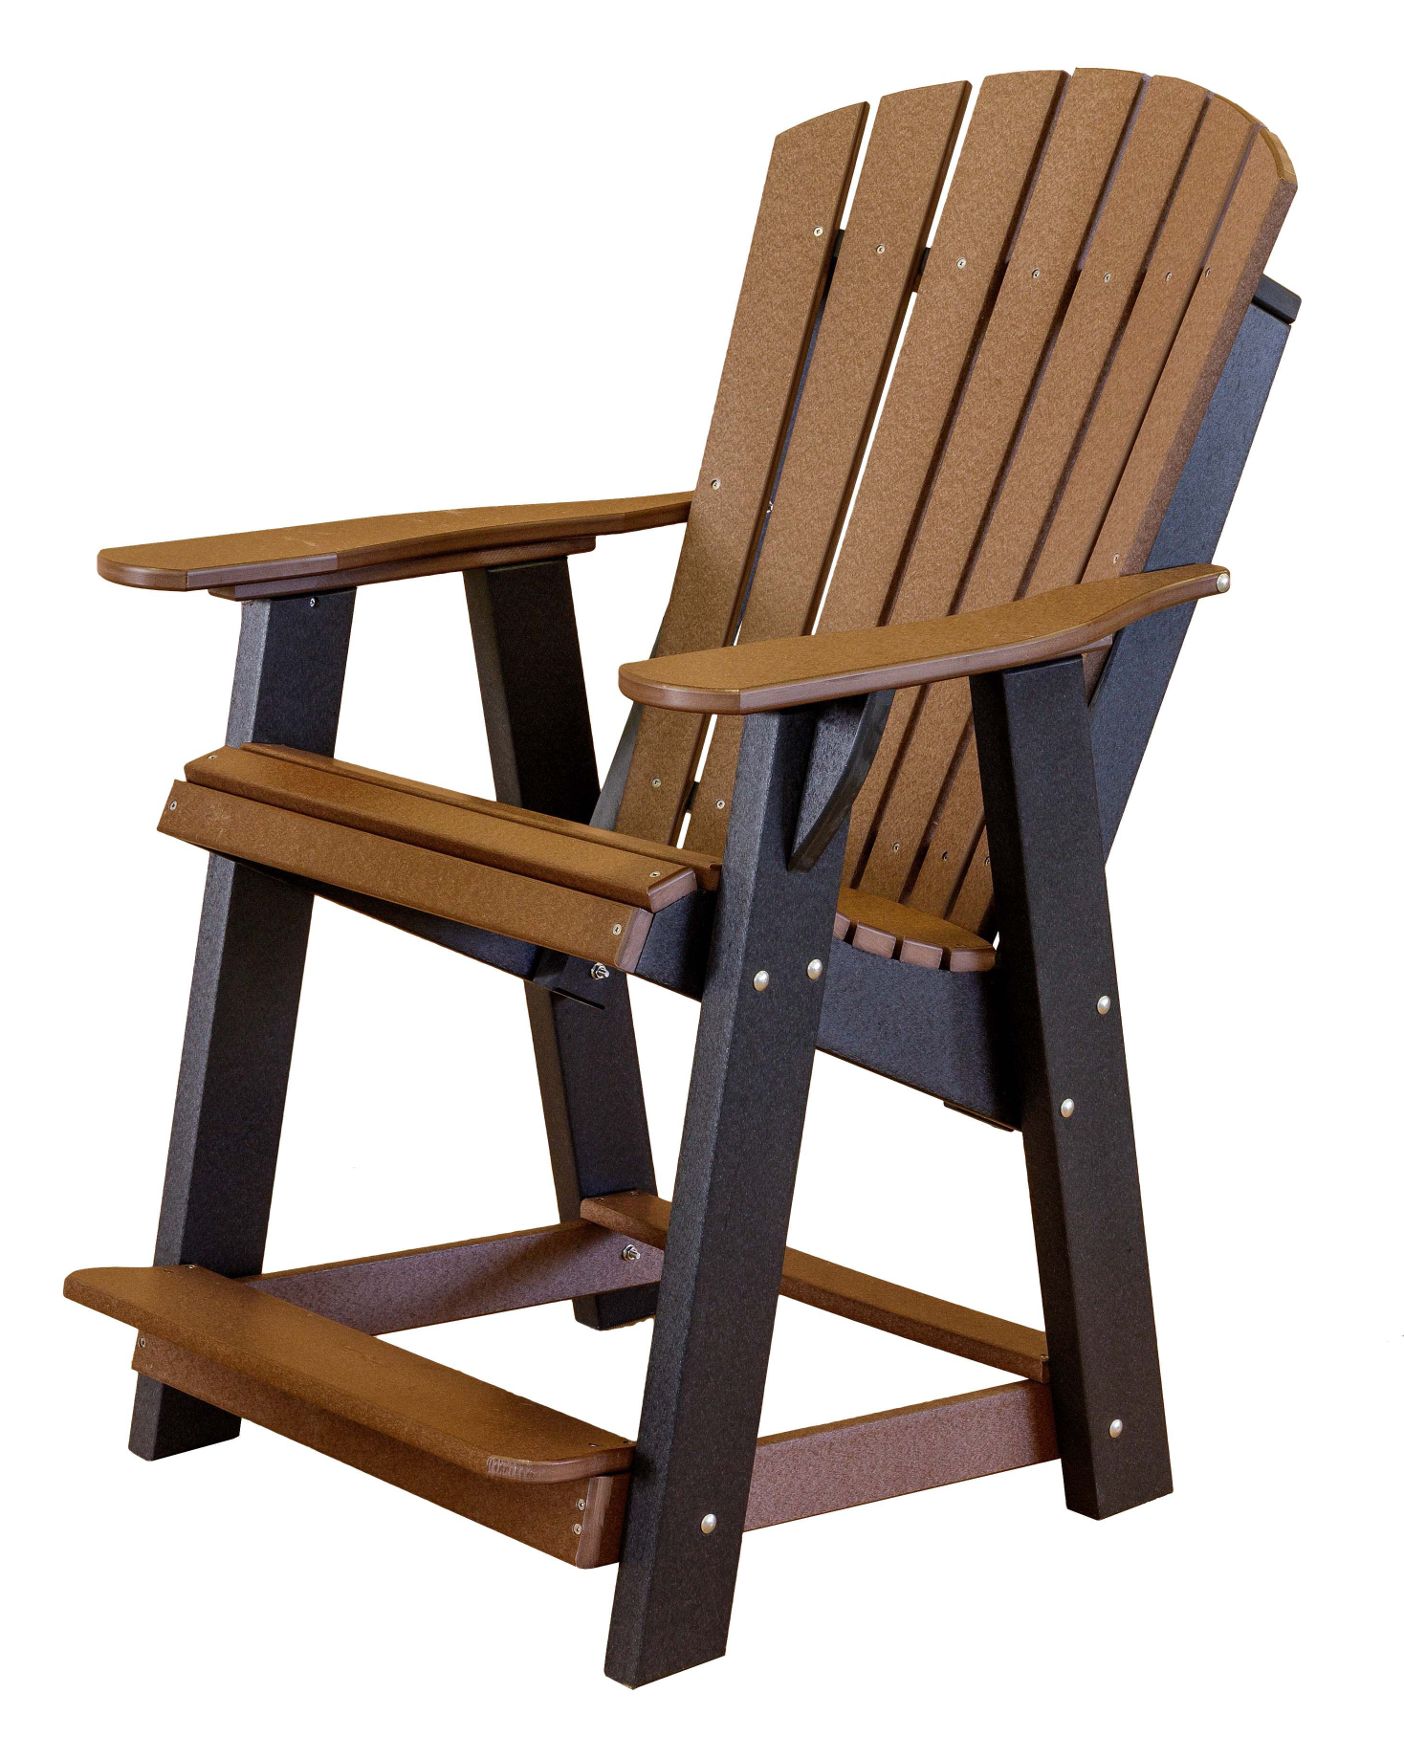 Wildridge Poly Vinyl Furniture Heritage High Adirondack Chair Lcc 119 Wooden Playscapes